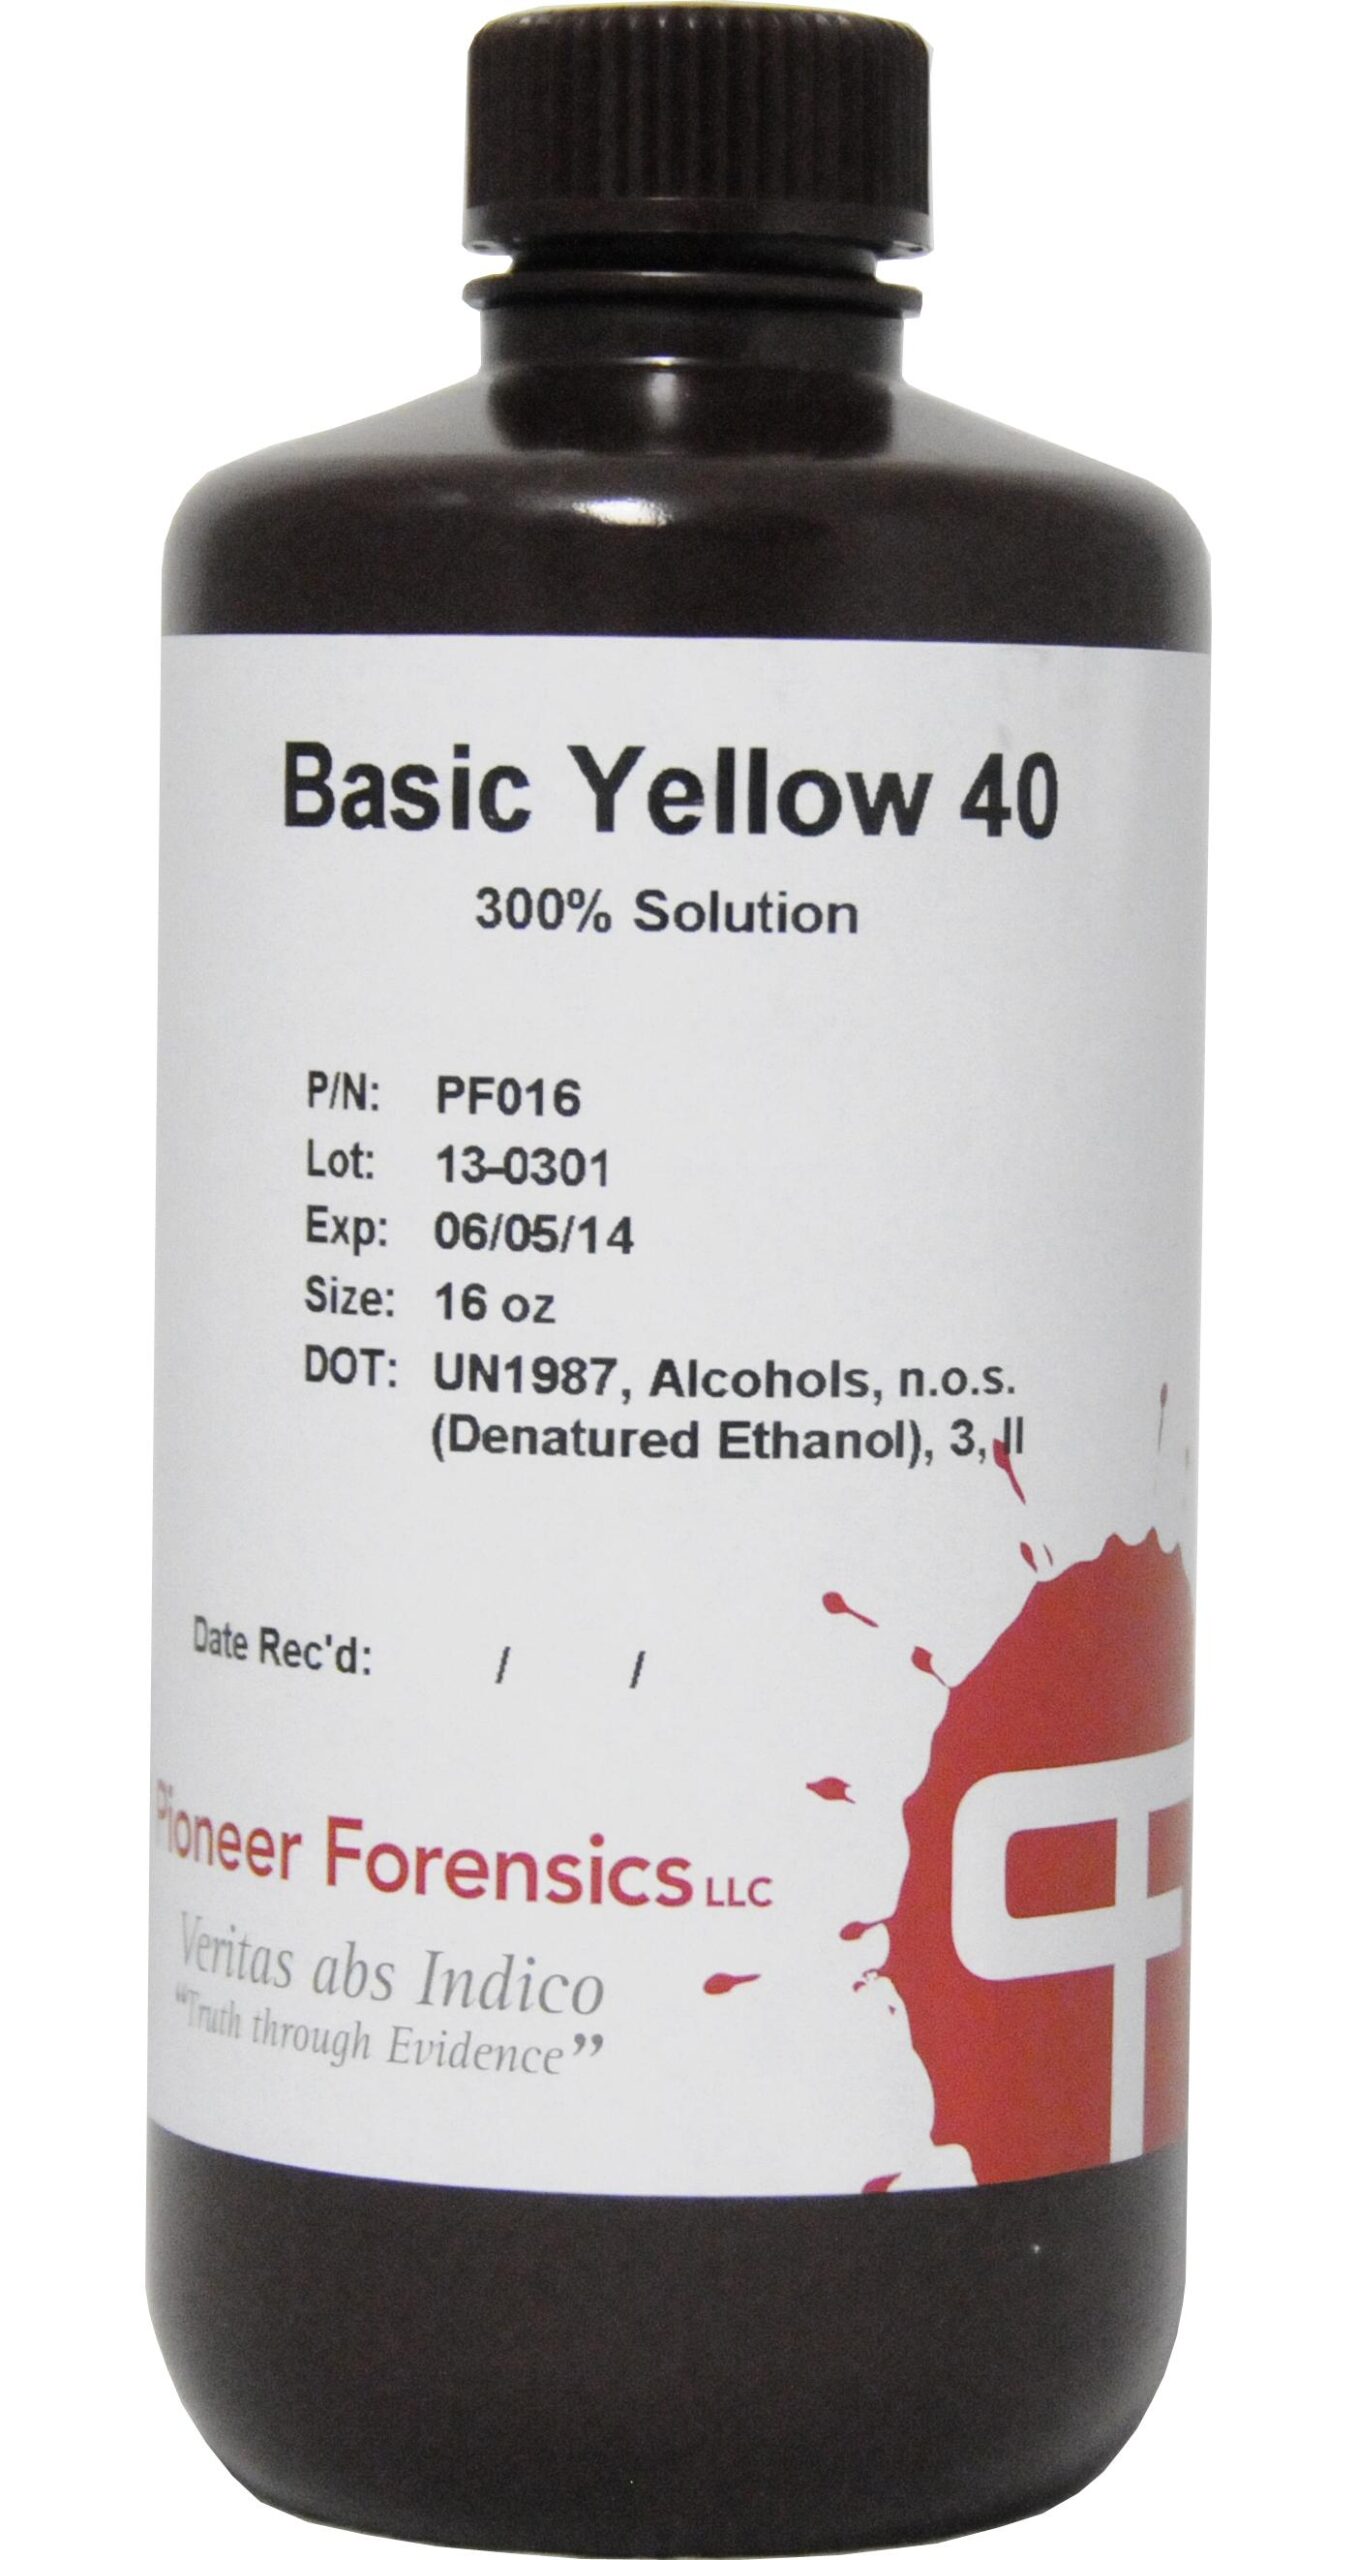 Basic Yellow 40 is a yellow dye used with a forensic light source or uv lamp after cyanoacrylate development of latent prints.